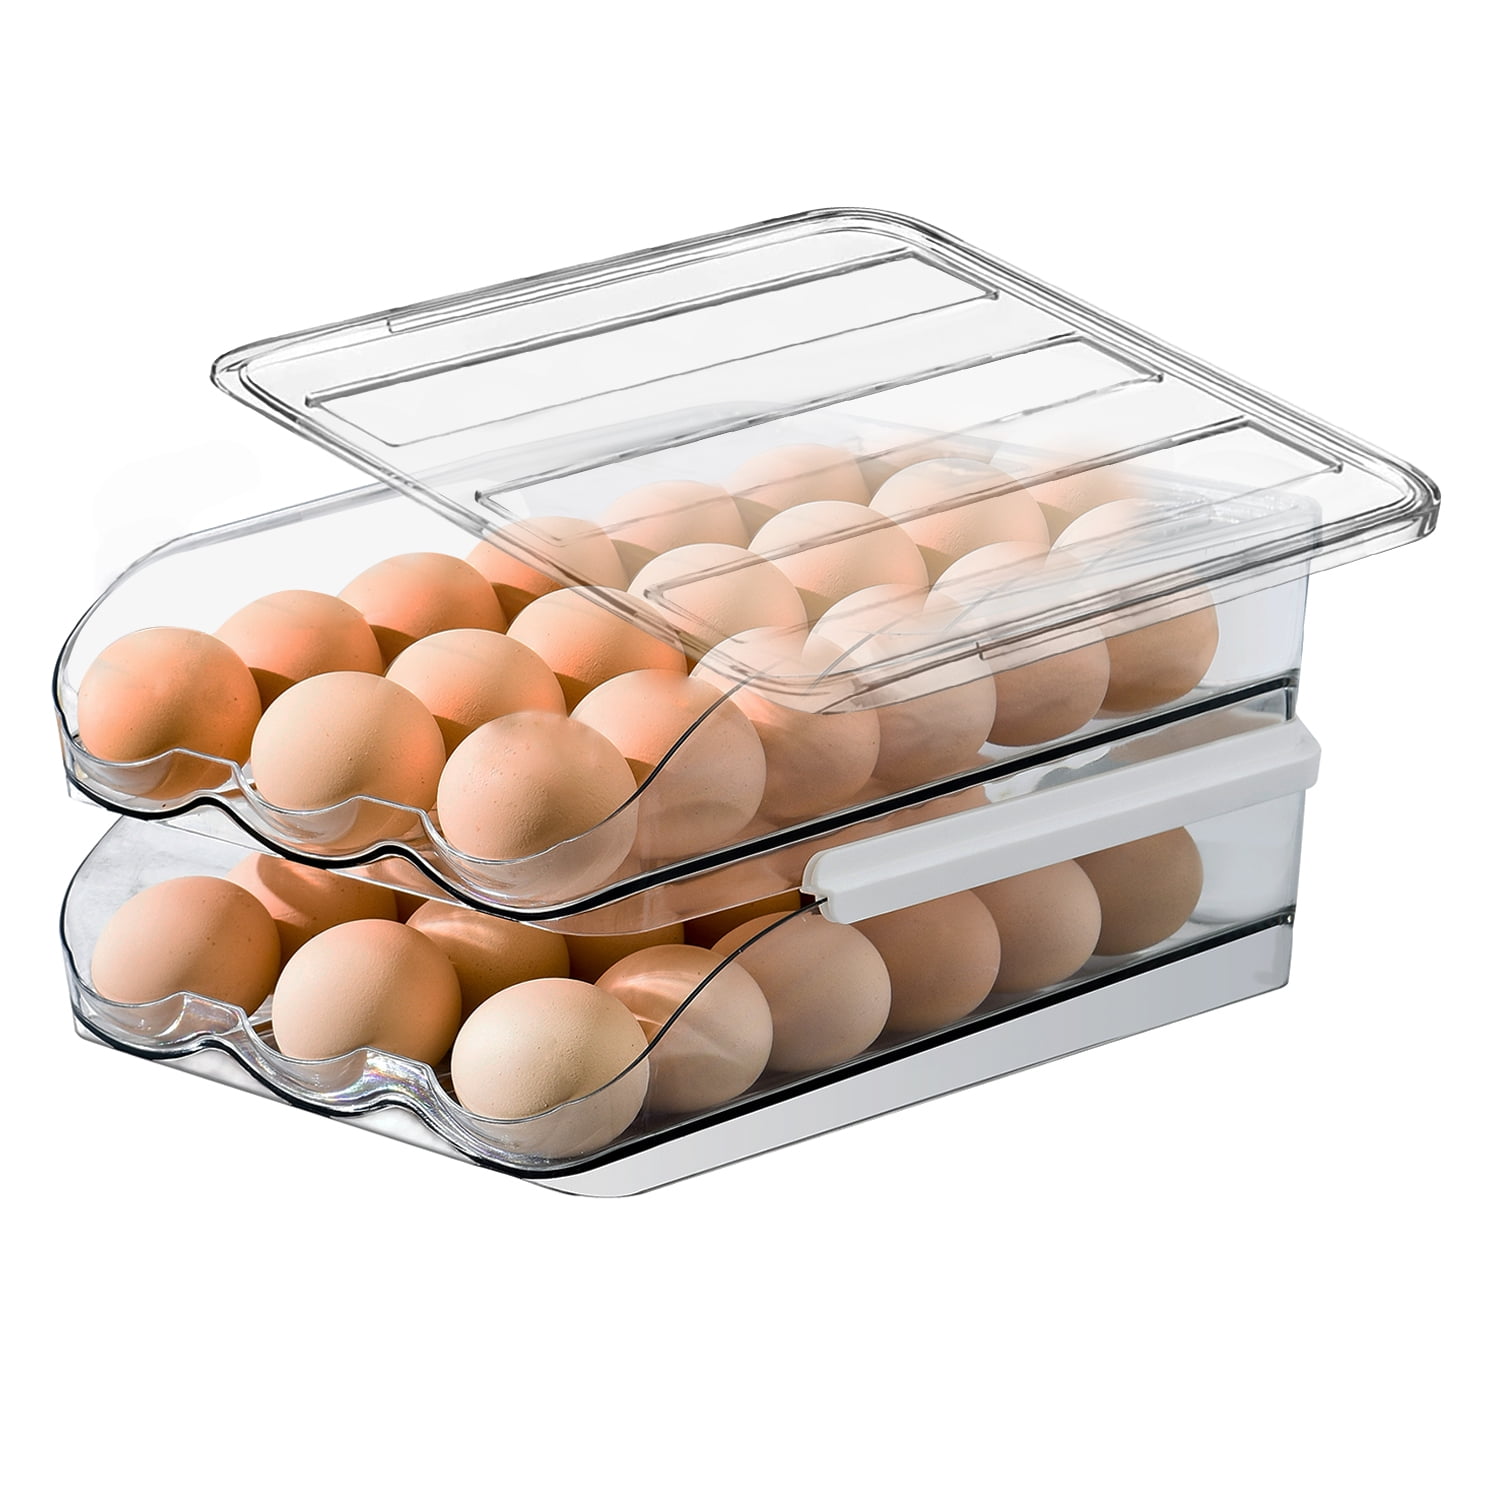 Dropship Egg Holder For Refrigerator, Egg Storage Box For Fridge, Flip Fridge  Egg Tray Container to Sell Online at a Lower Price